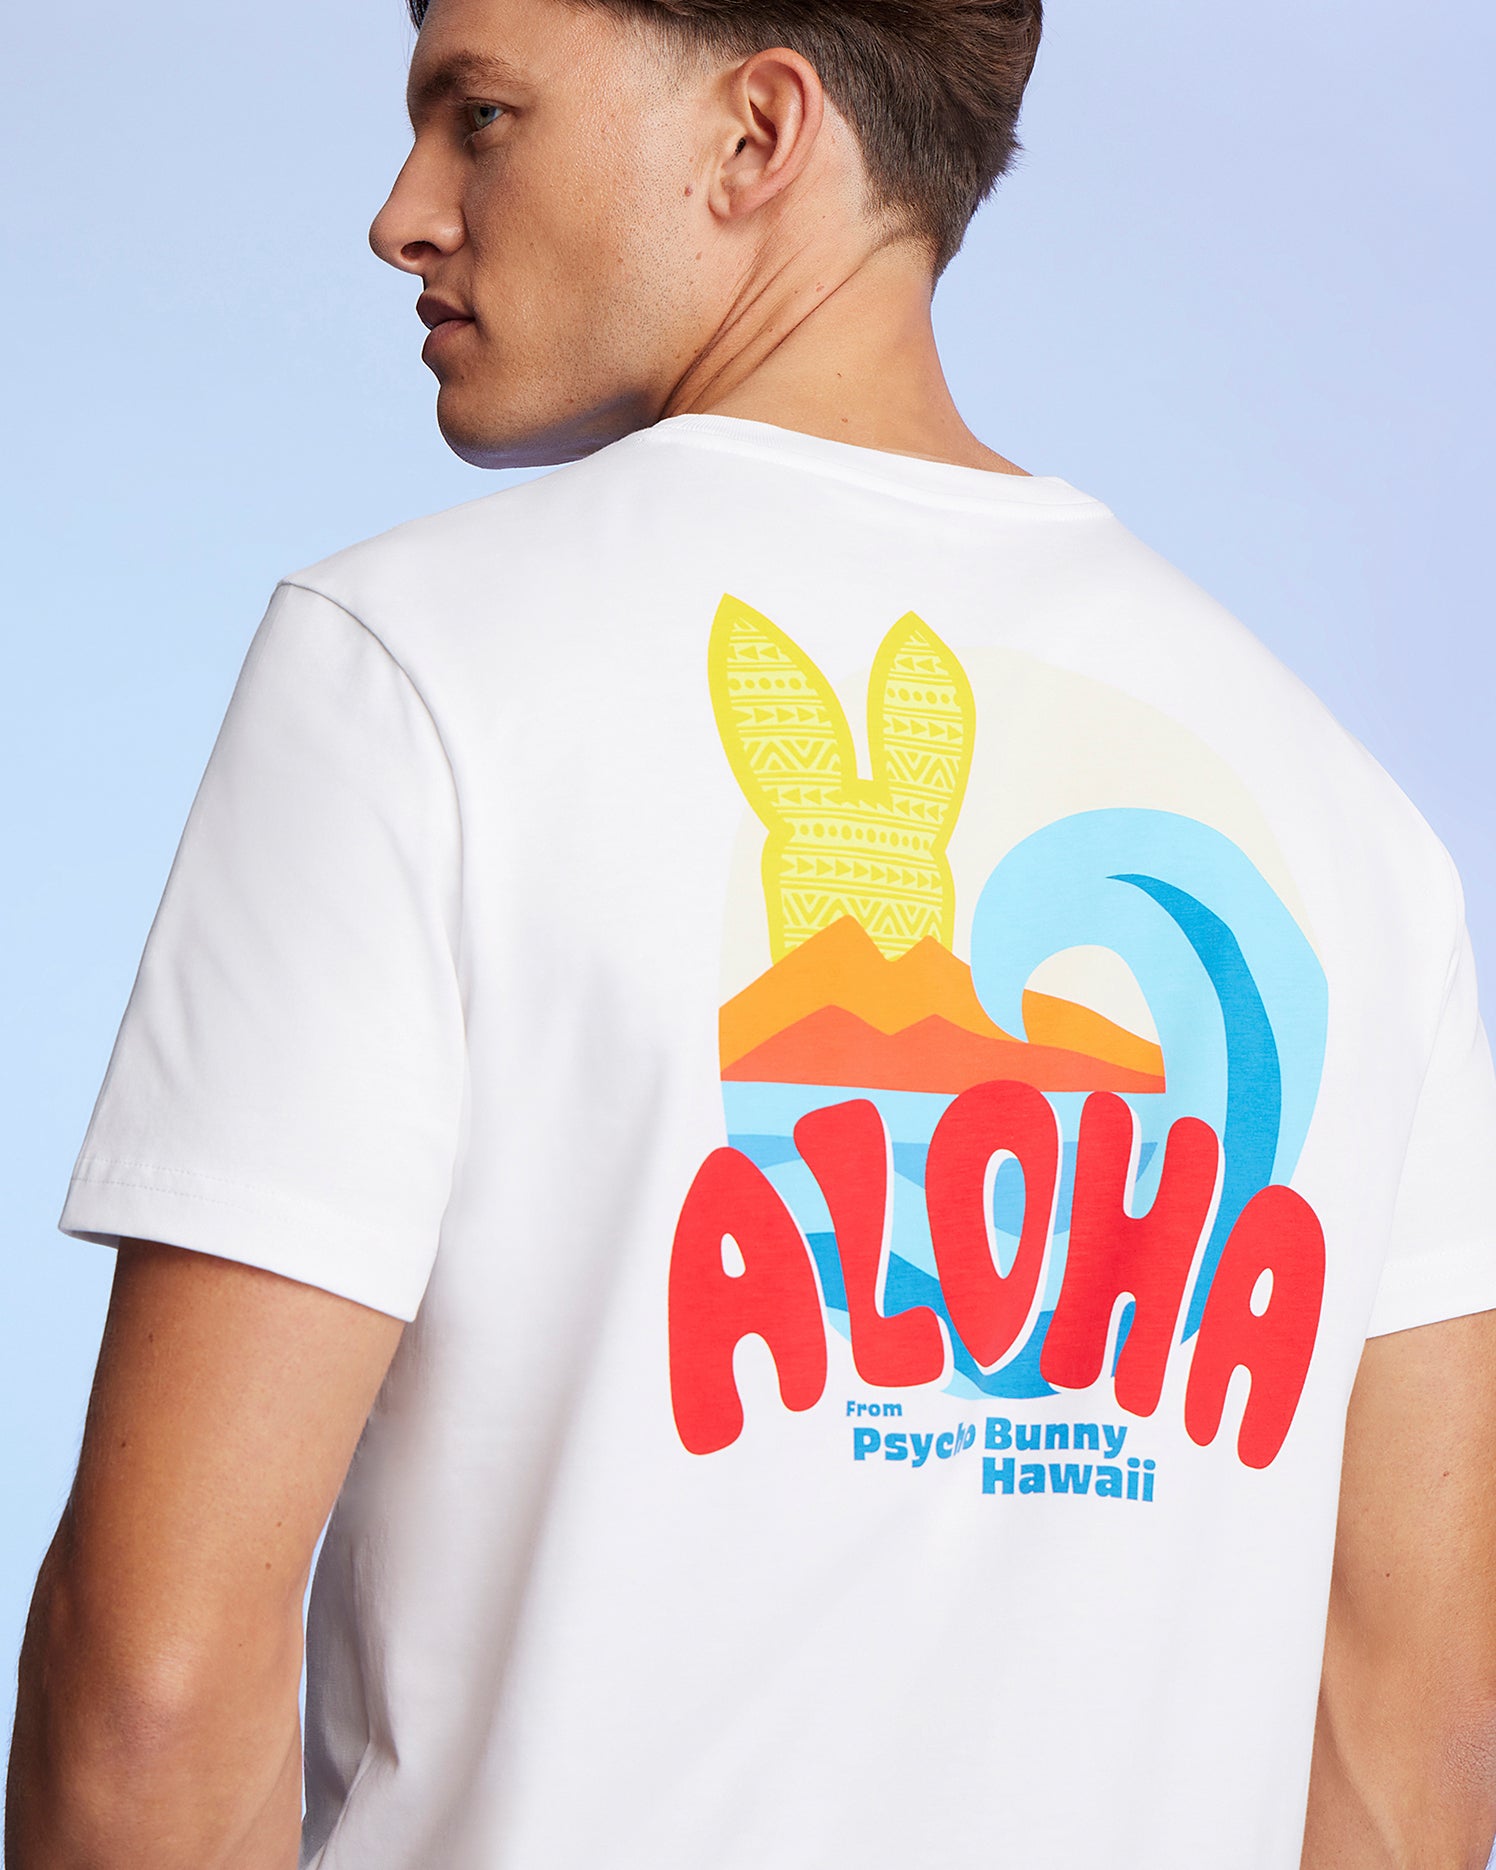 A man is shown from the side wearing a white Pima cotton jersey MENS HAWAII CITY TEE - B6U169Y1PC with a colorful design on the back. The design features the text 